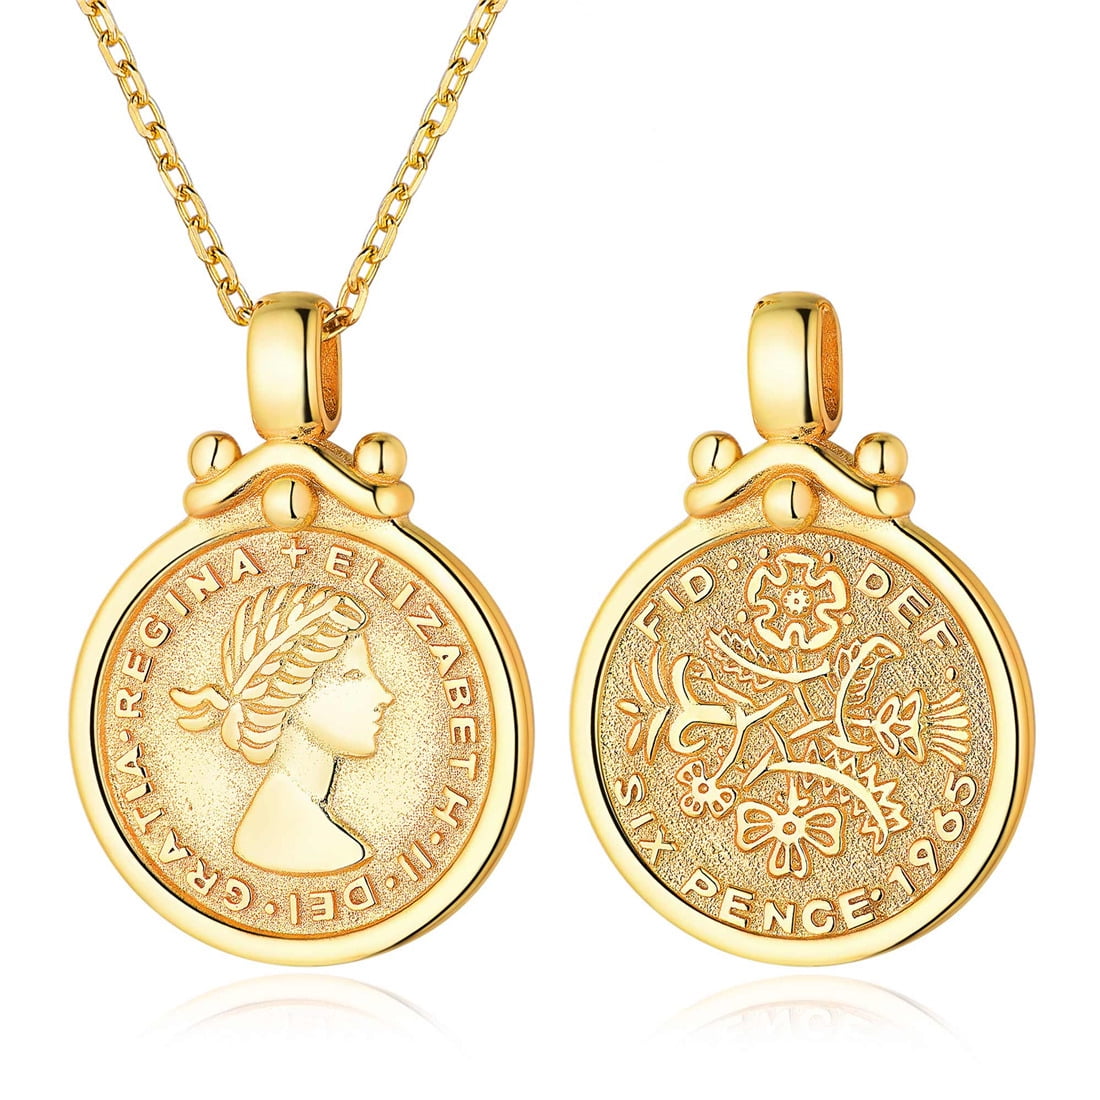 24K 995 Pure Gold Necklace with Double Sided Coin Pendant for Women -  1-1-GN-V00638 in 21.690 Grams